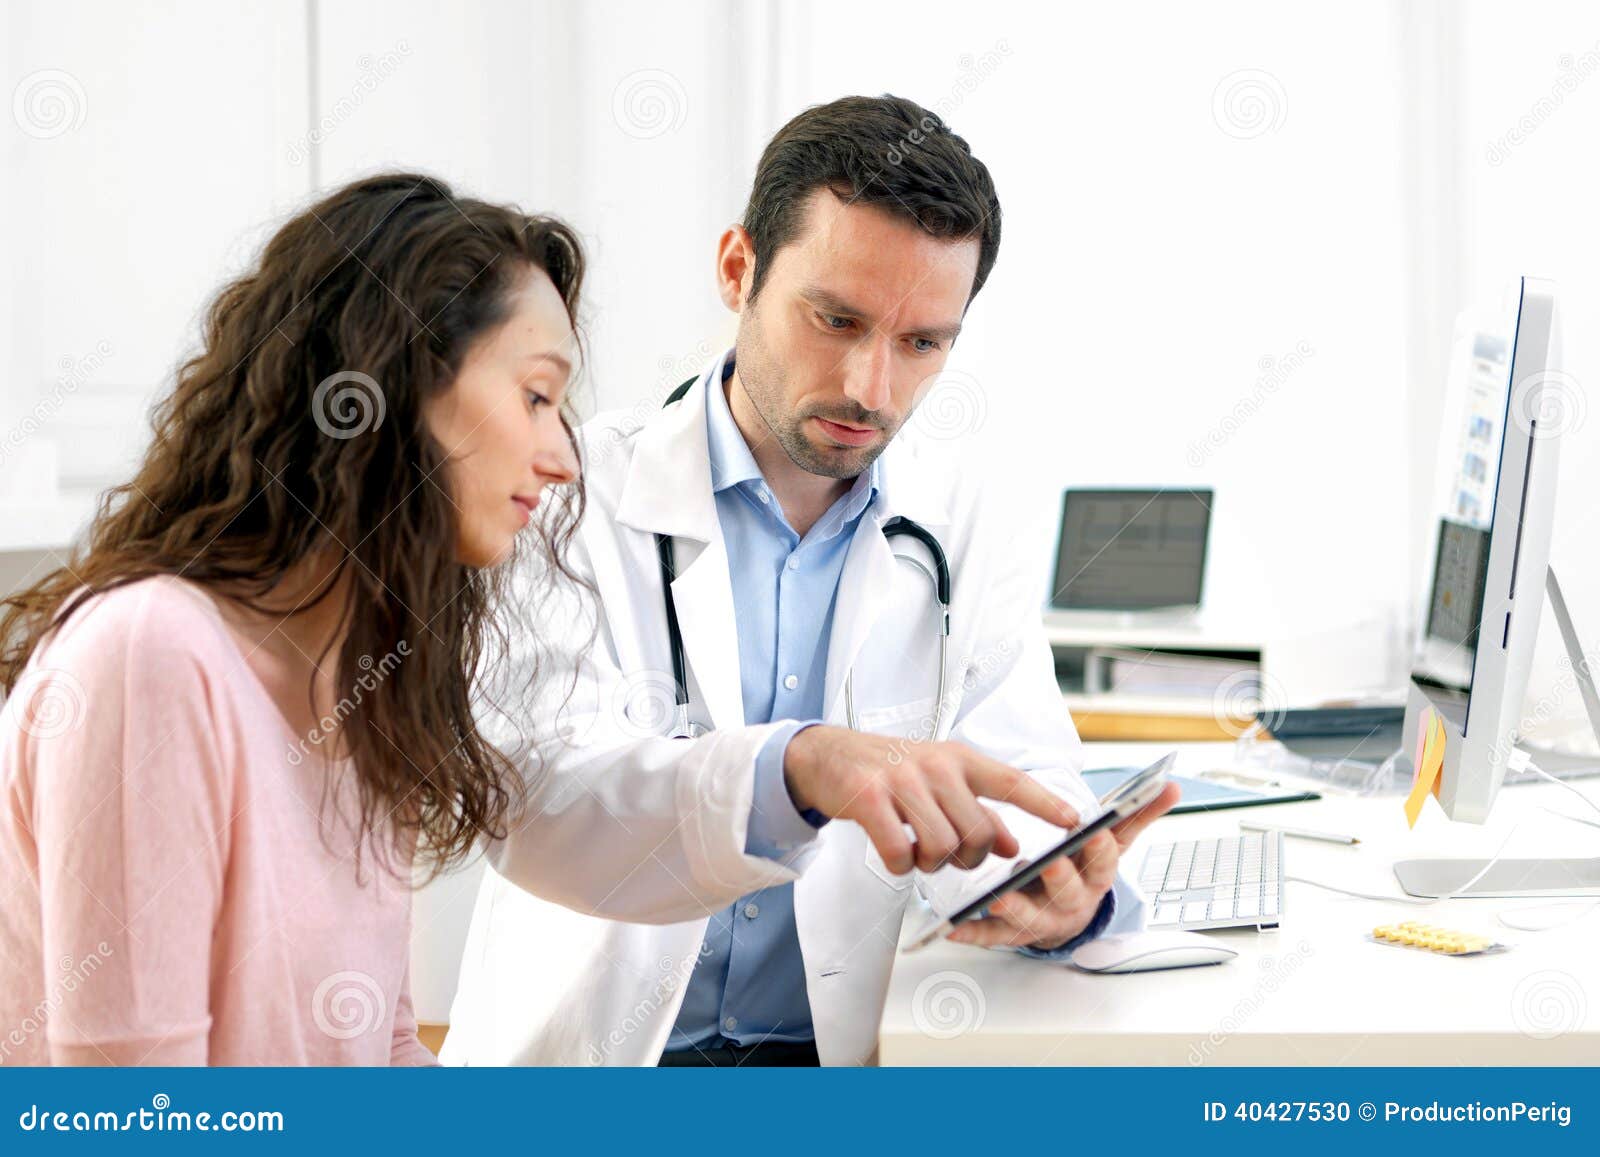 doctor using tablet to inform patient